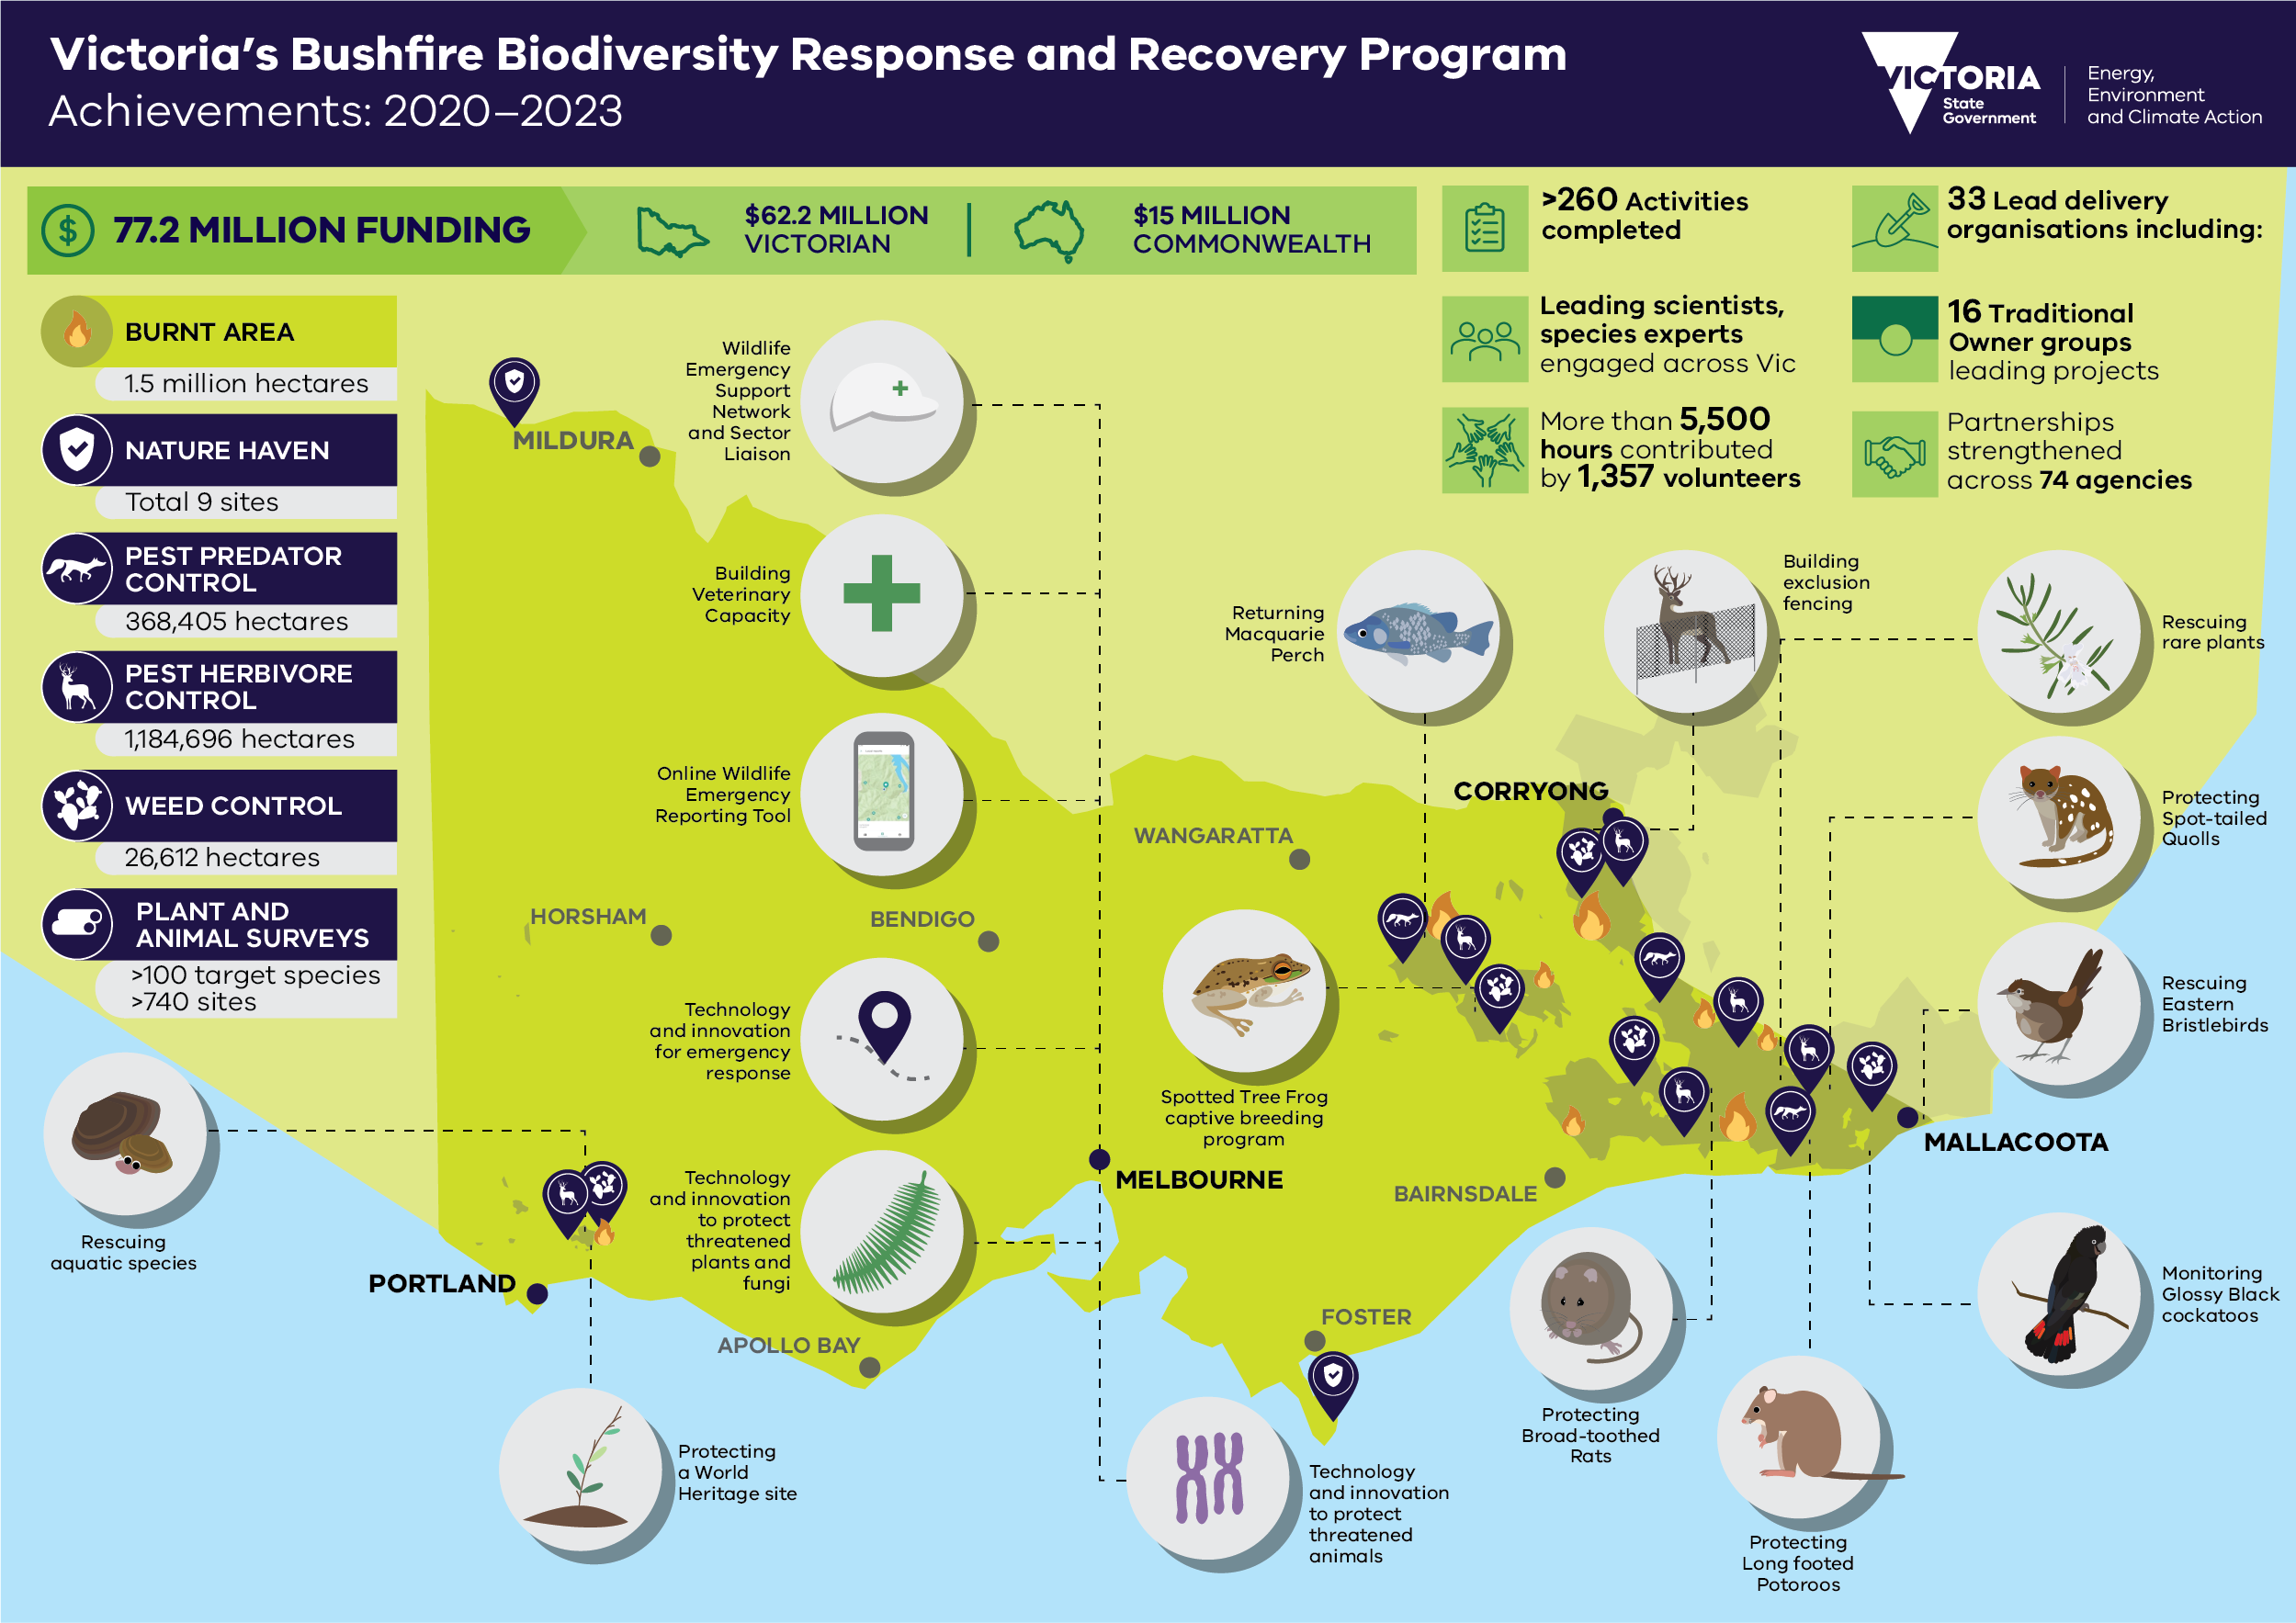 A map of Victoria showing the actions and achievements of the Biodiversity Bushfire Response and Recovery program.